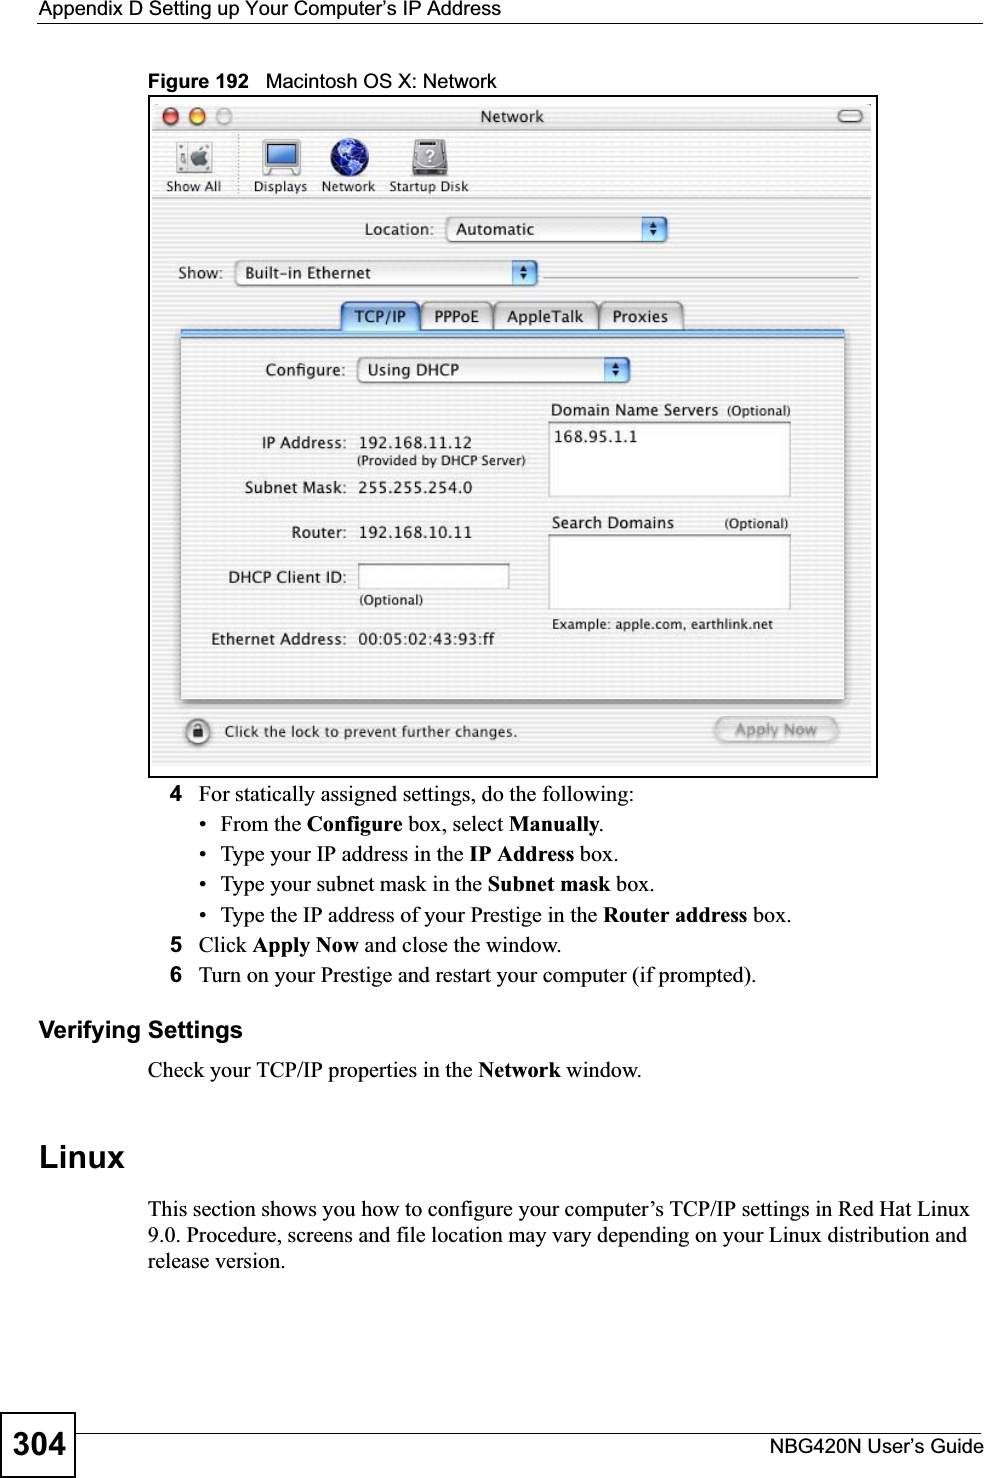 Appendix D Setting up Your Computer’s IP AddressNBG420N User’s Guide304Figure 192   Macintosh OS X: Network4For statically assigned settings, do the following:•From the Configure box, select Manually.• Type your IP address in the IP Address box.• Type your subnet mask in the Subnet mask box.• Type the IP address of your Prestige in the Router address box.5Click Apply Now and close the window.6Turn on your Prestige and restart your computer (if prompted).Verifying SettingsCheck your TCP/IP properties in the Network window.LinuxThis section shows you how to configure your computer’s TCP/IP settings in Red Hat Linux 9.0. Procedure, screens and file location may vary depending on your Linux distribution and release version. 